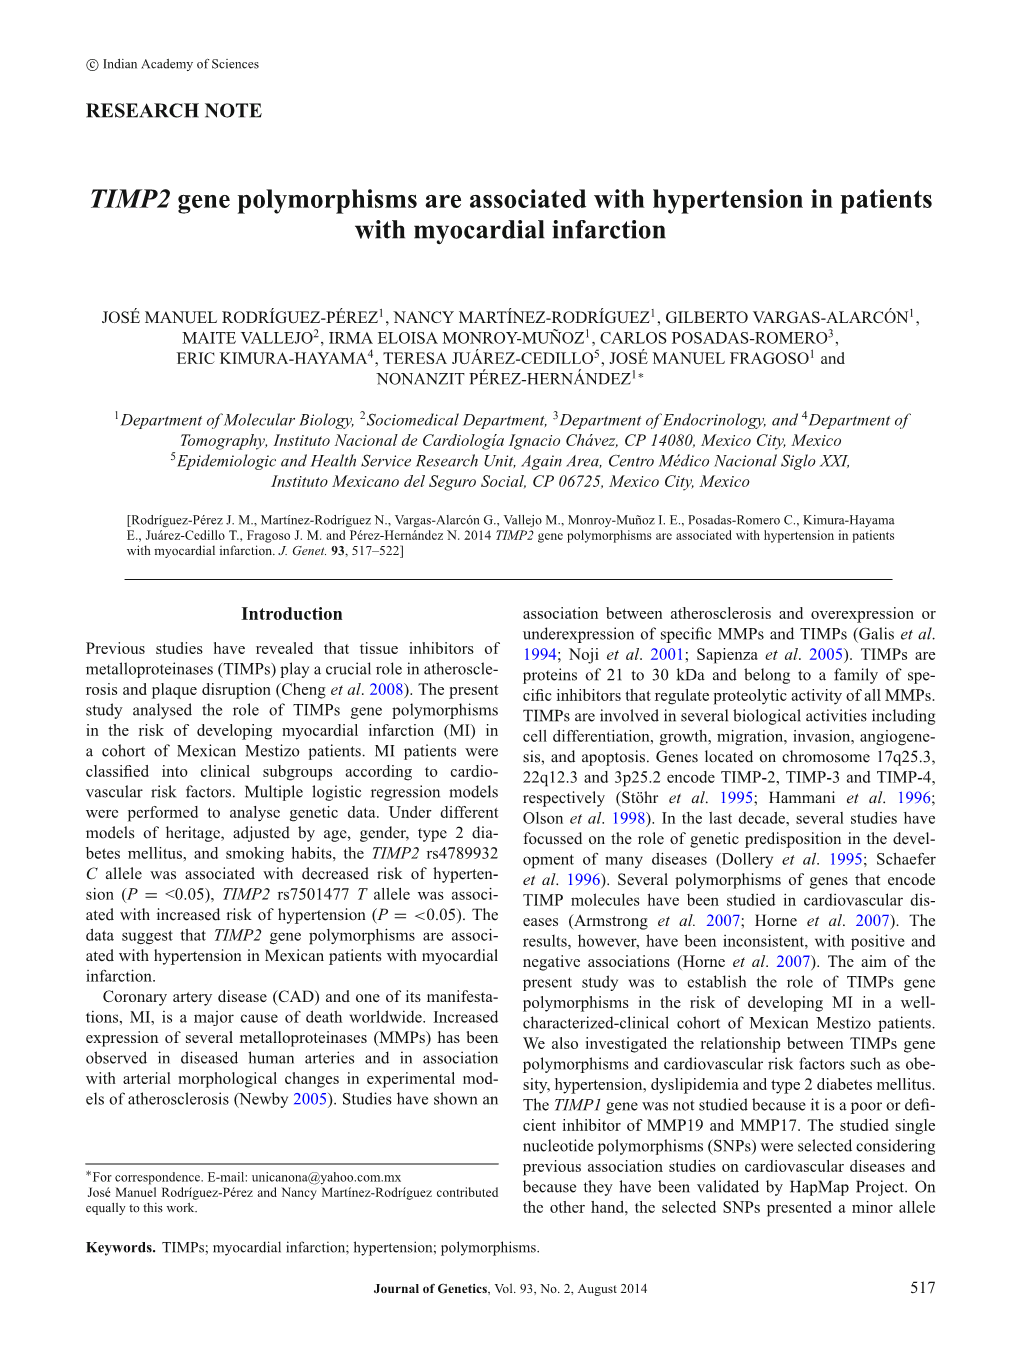 TIMP2 Gene Polymorphisms Are Associated with Hypertension in Patients with Myocardial Infarction